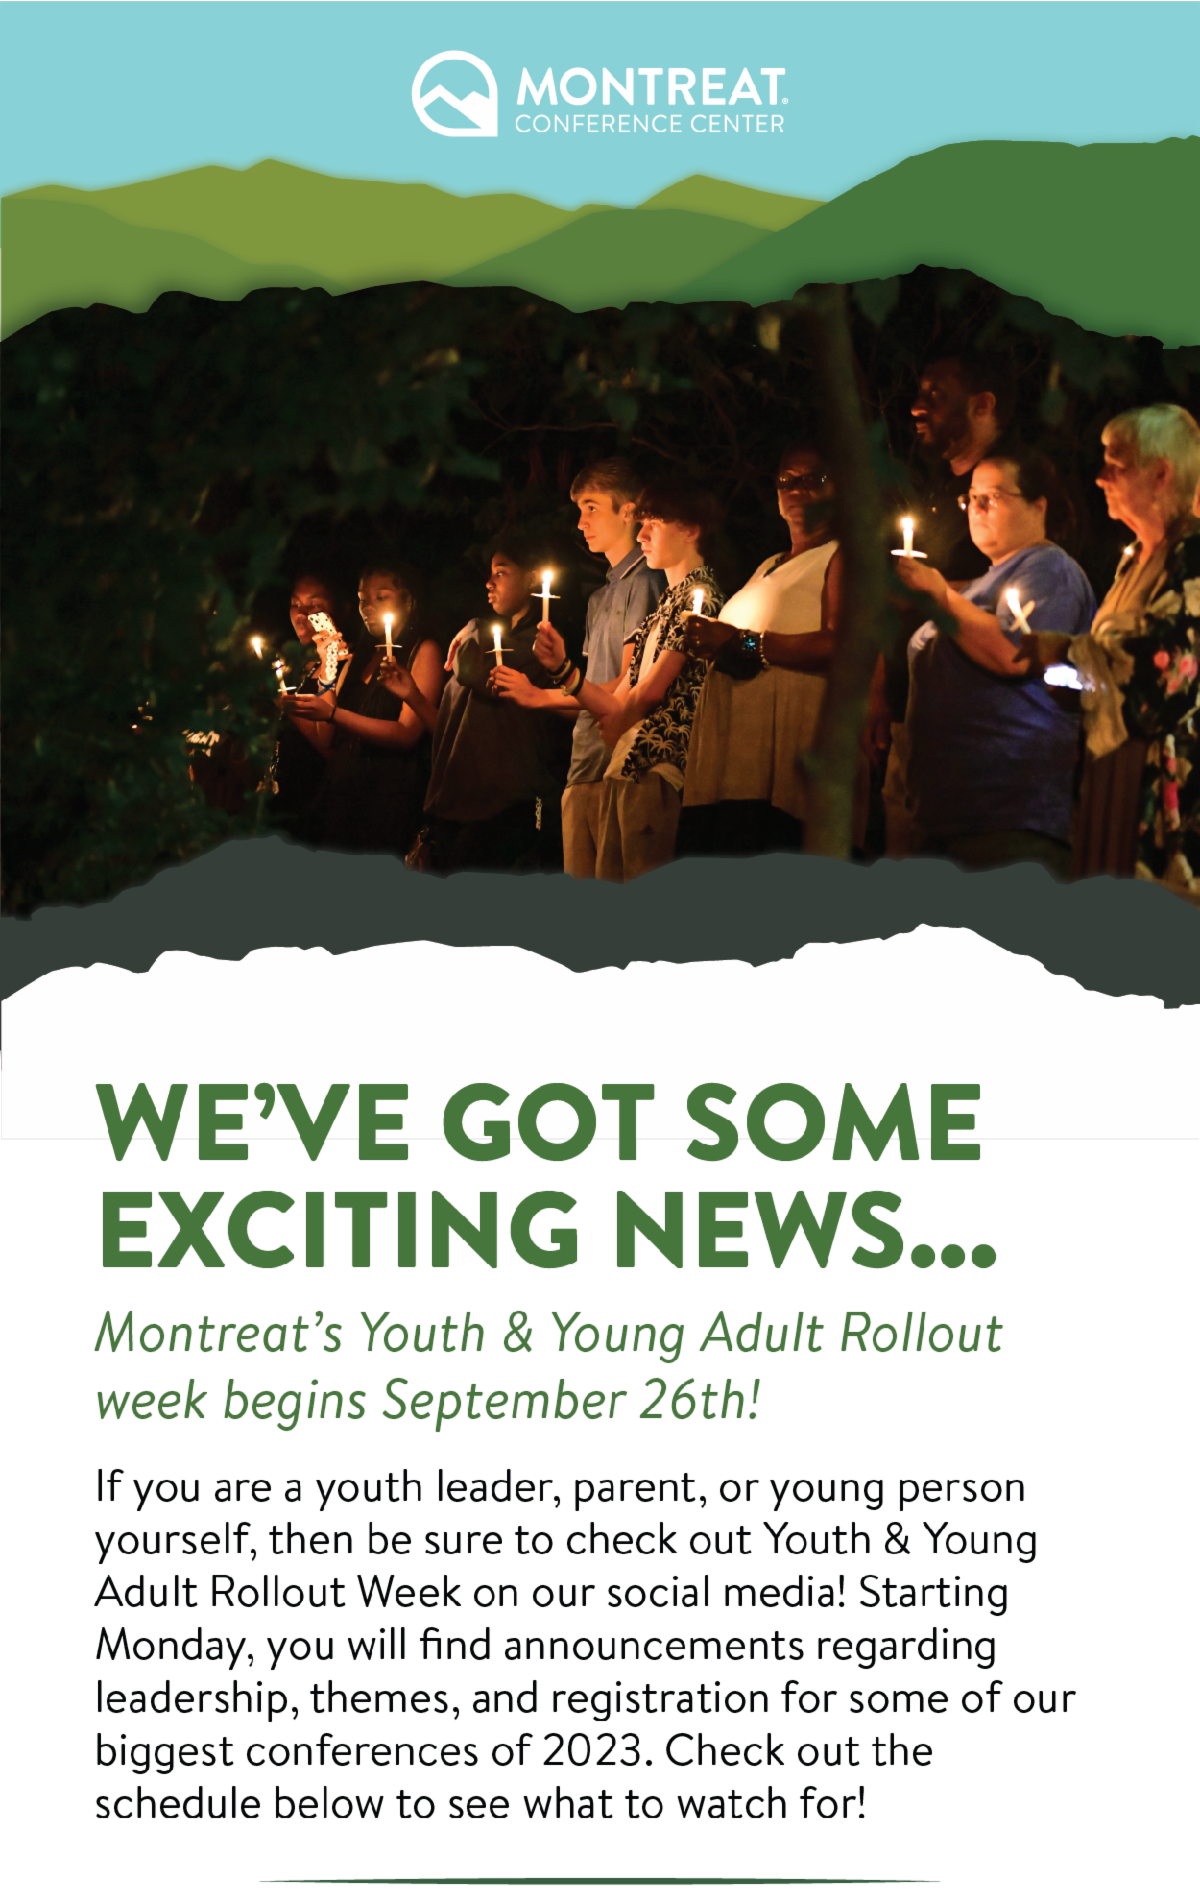 We've got some exciting news... Montreat's Youth & Young Adult Rollout week begins September 26th! - If you are a youth leader, parent, or young person yourself, then be sure to check out Youth & Young Adult Rollout Week on our social media! Starting Monday, you will find announcements regarding leadership, theming, and registration for some of our biggest conferences of 2023. Check out the schedule below to see what to watch for! 